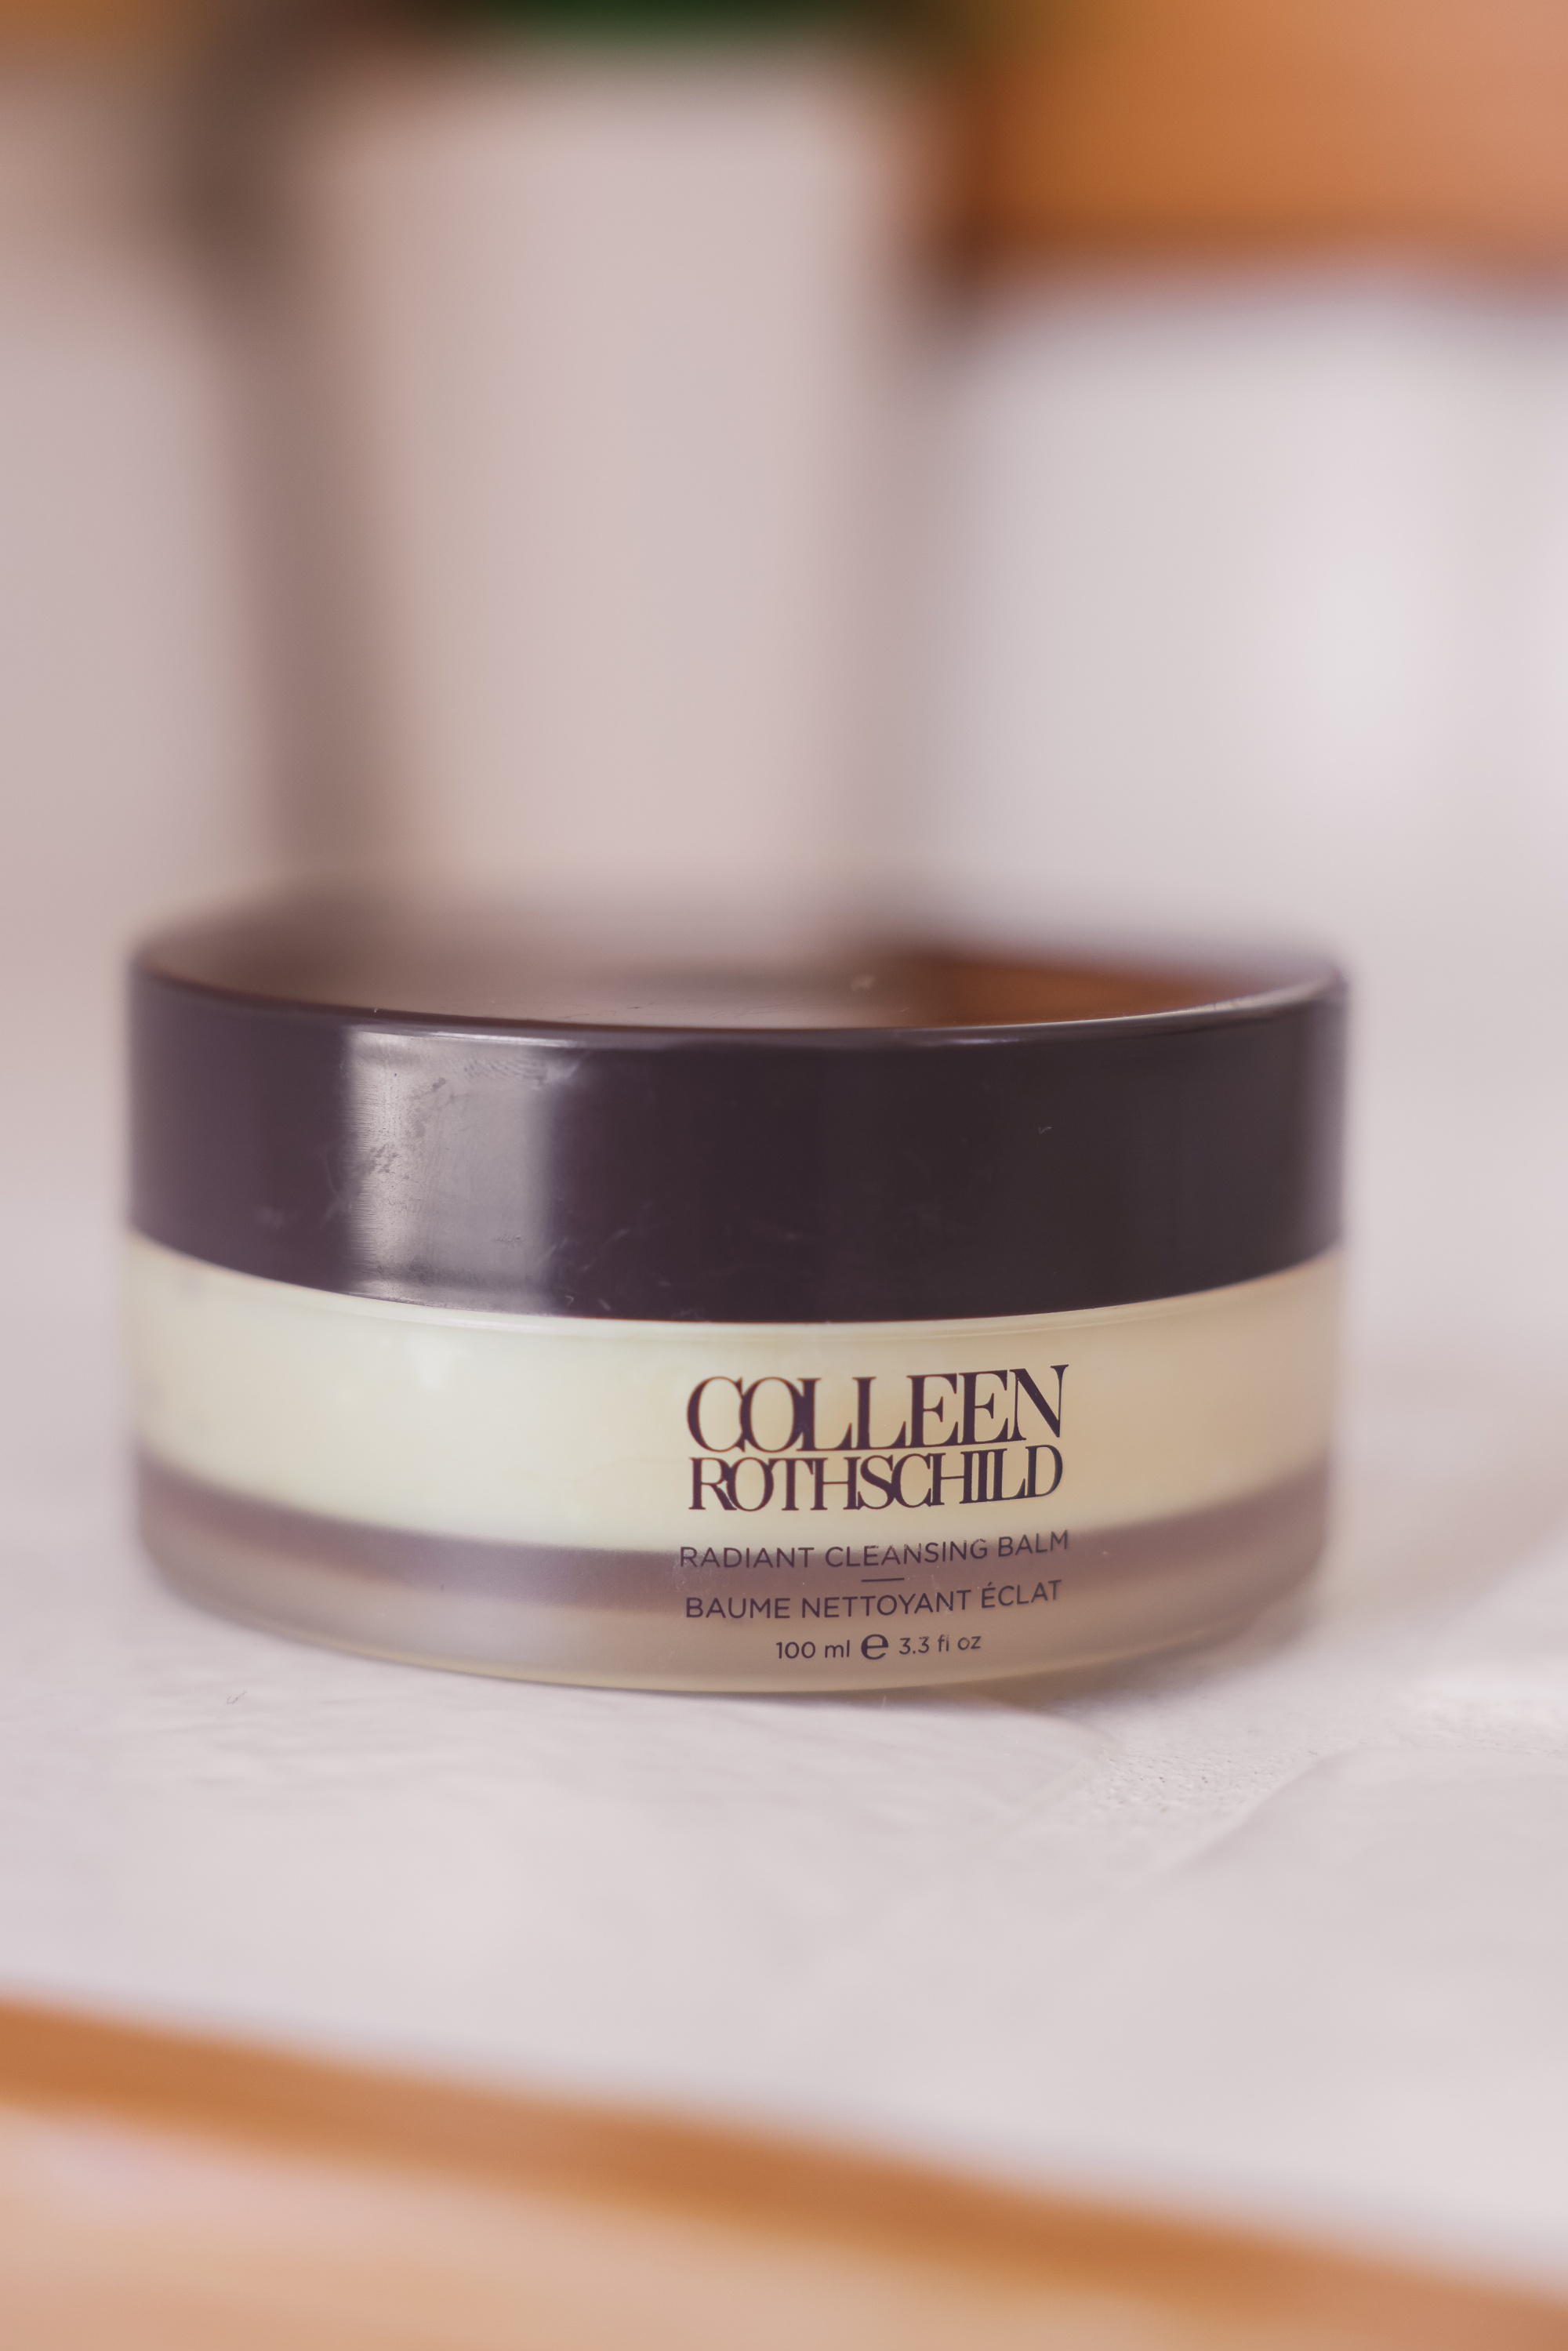 top skincare favorites of the year for women over 40 featuring Colleen Rothschild's Radiant Cleansing Balm